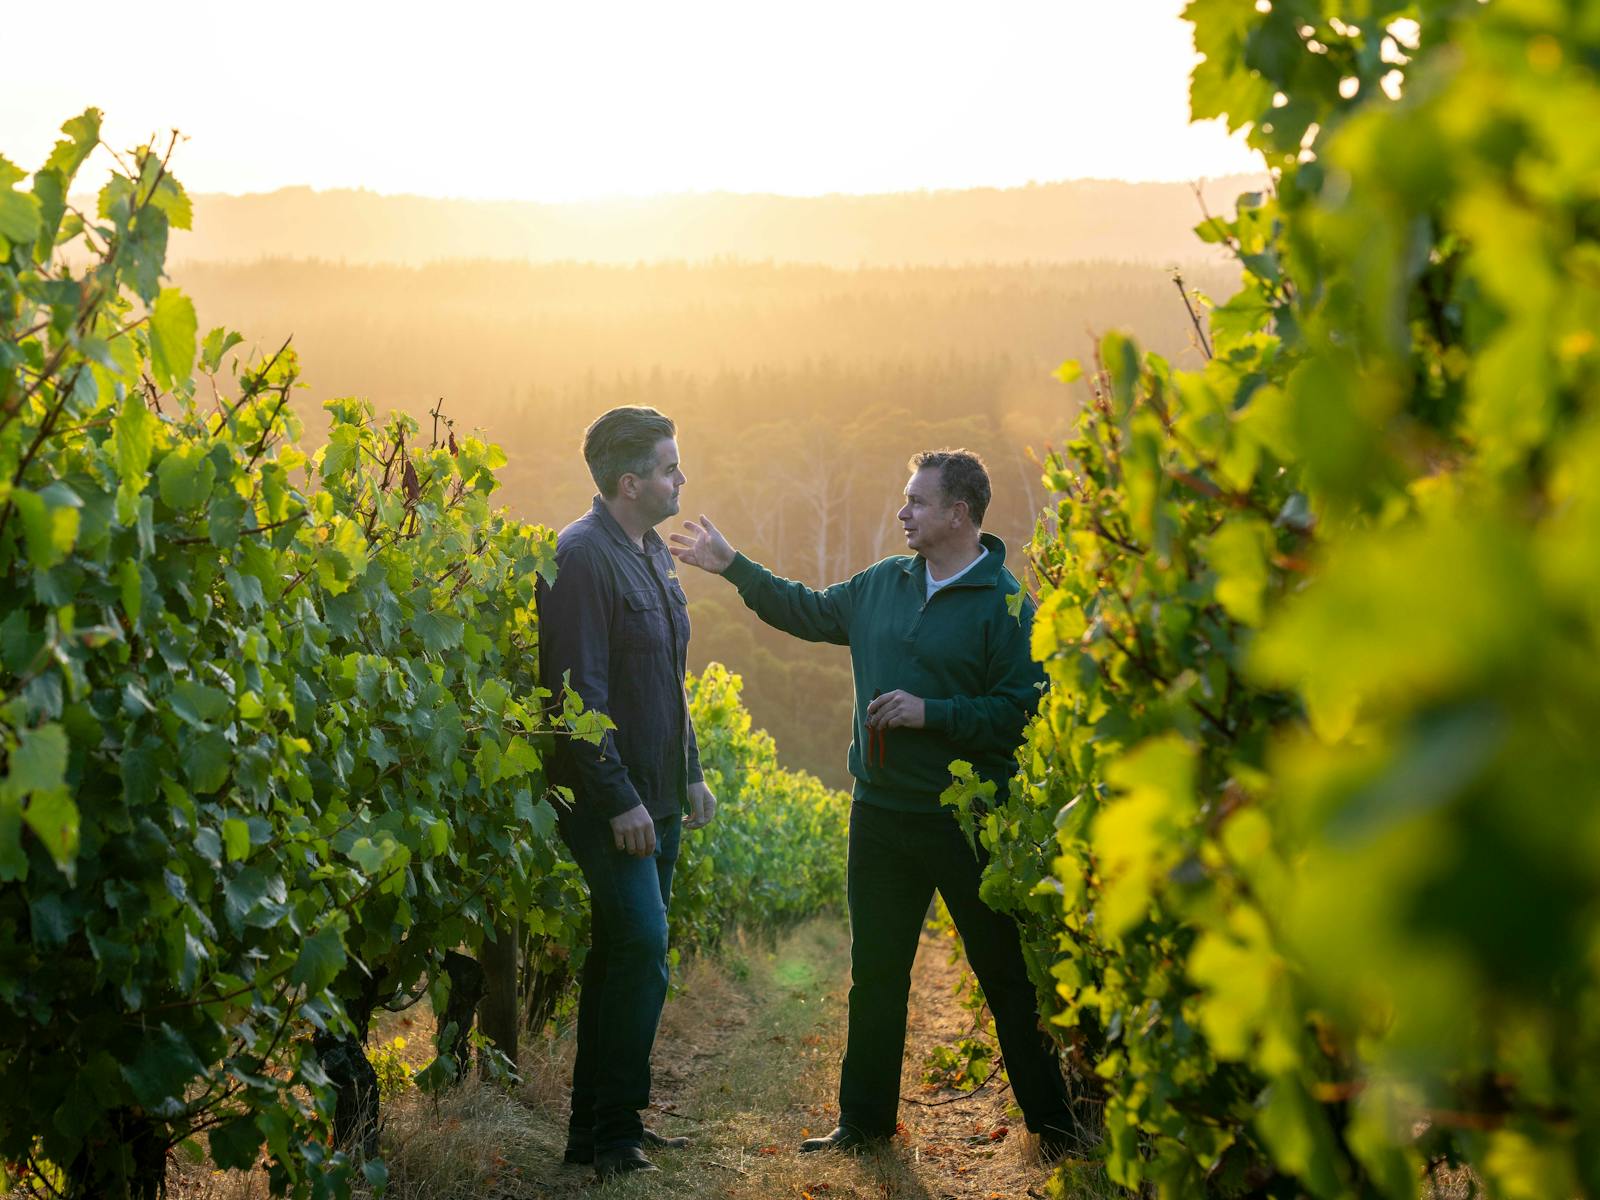 A winemaker and viticulturist stand among grape vines passionately engaged in discussion